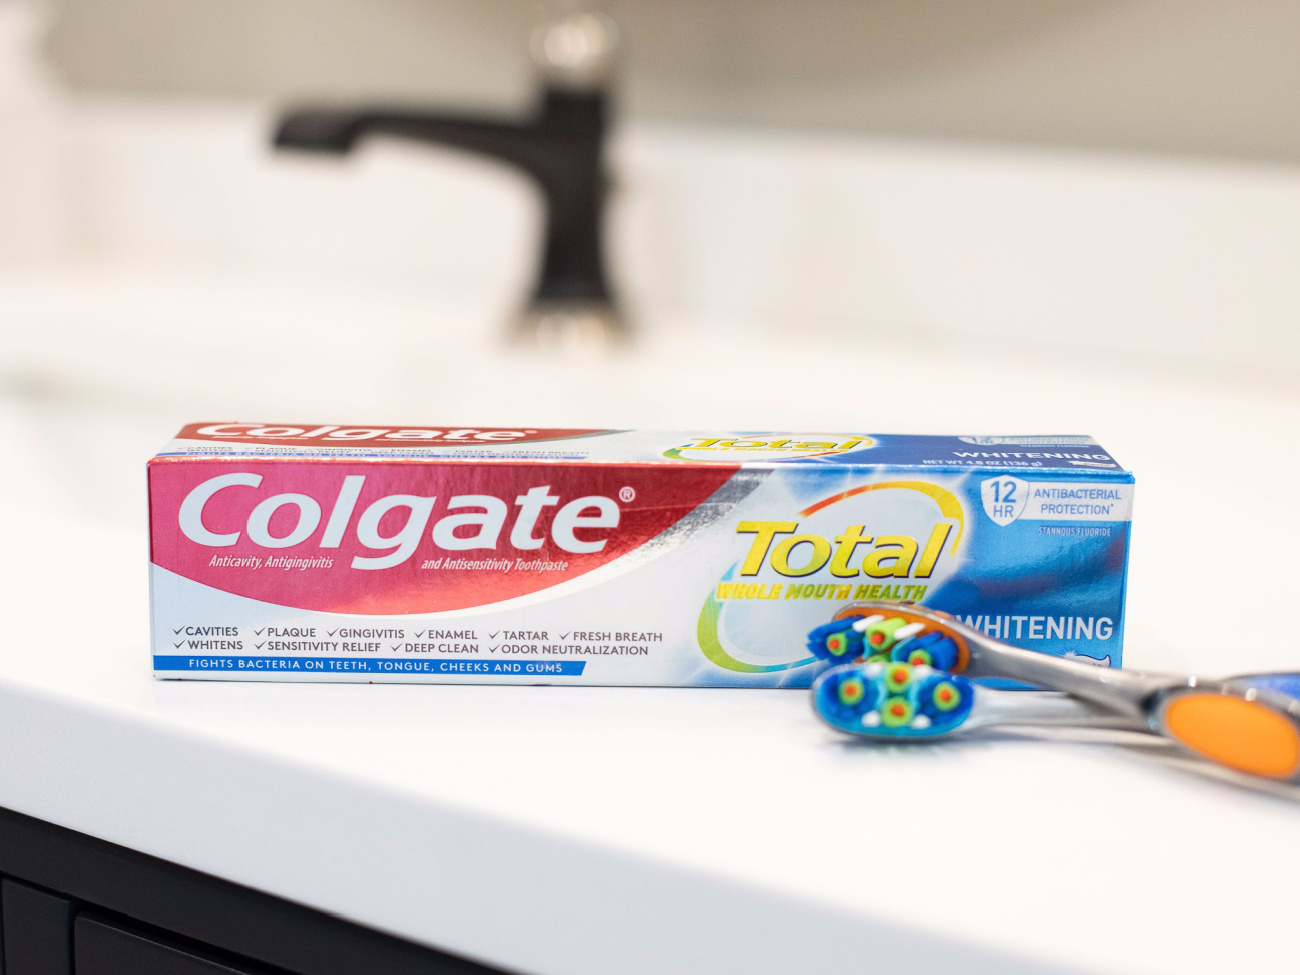 Grab Colgate Total Toothpaste As Low As FREE At Publix – Ends 10/1